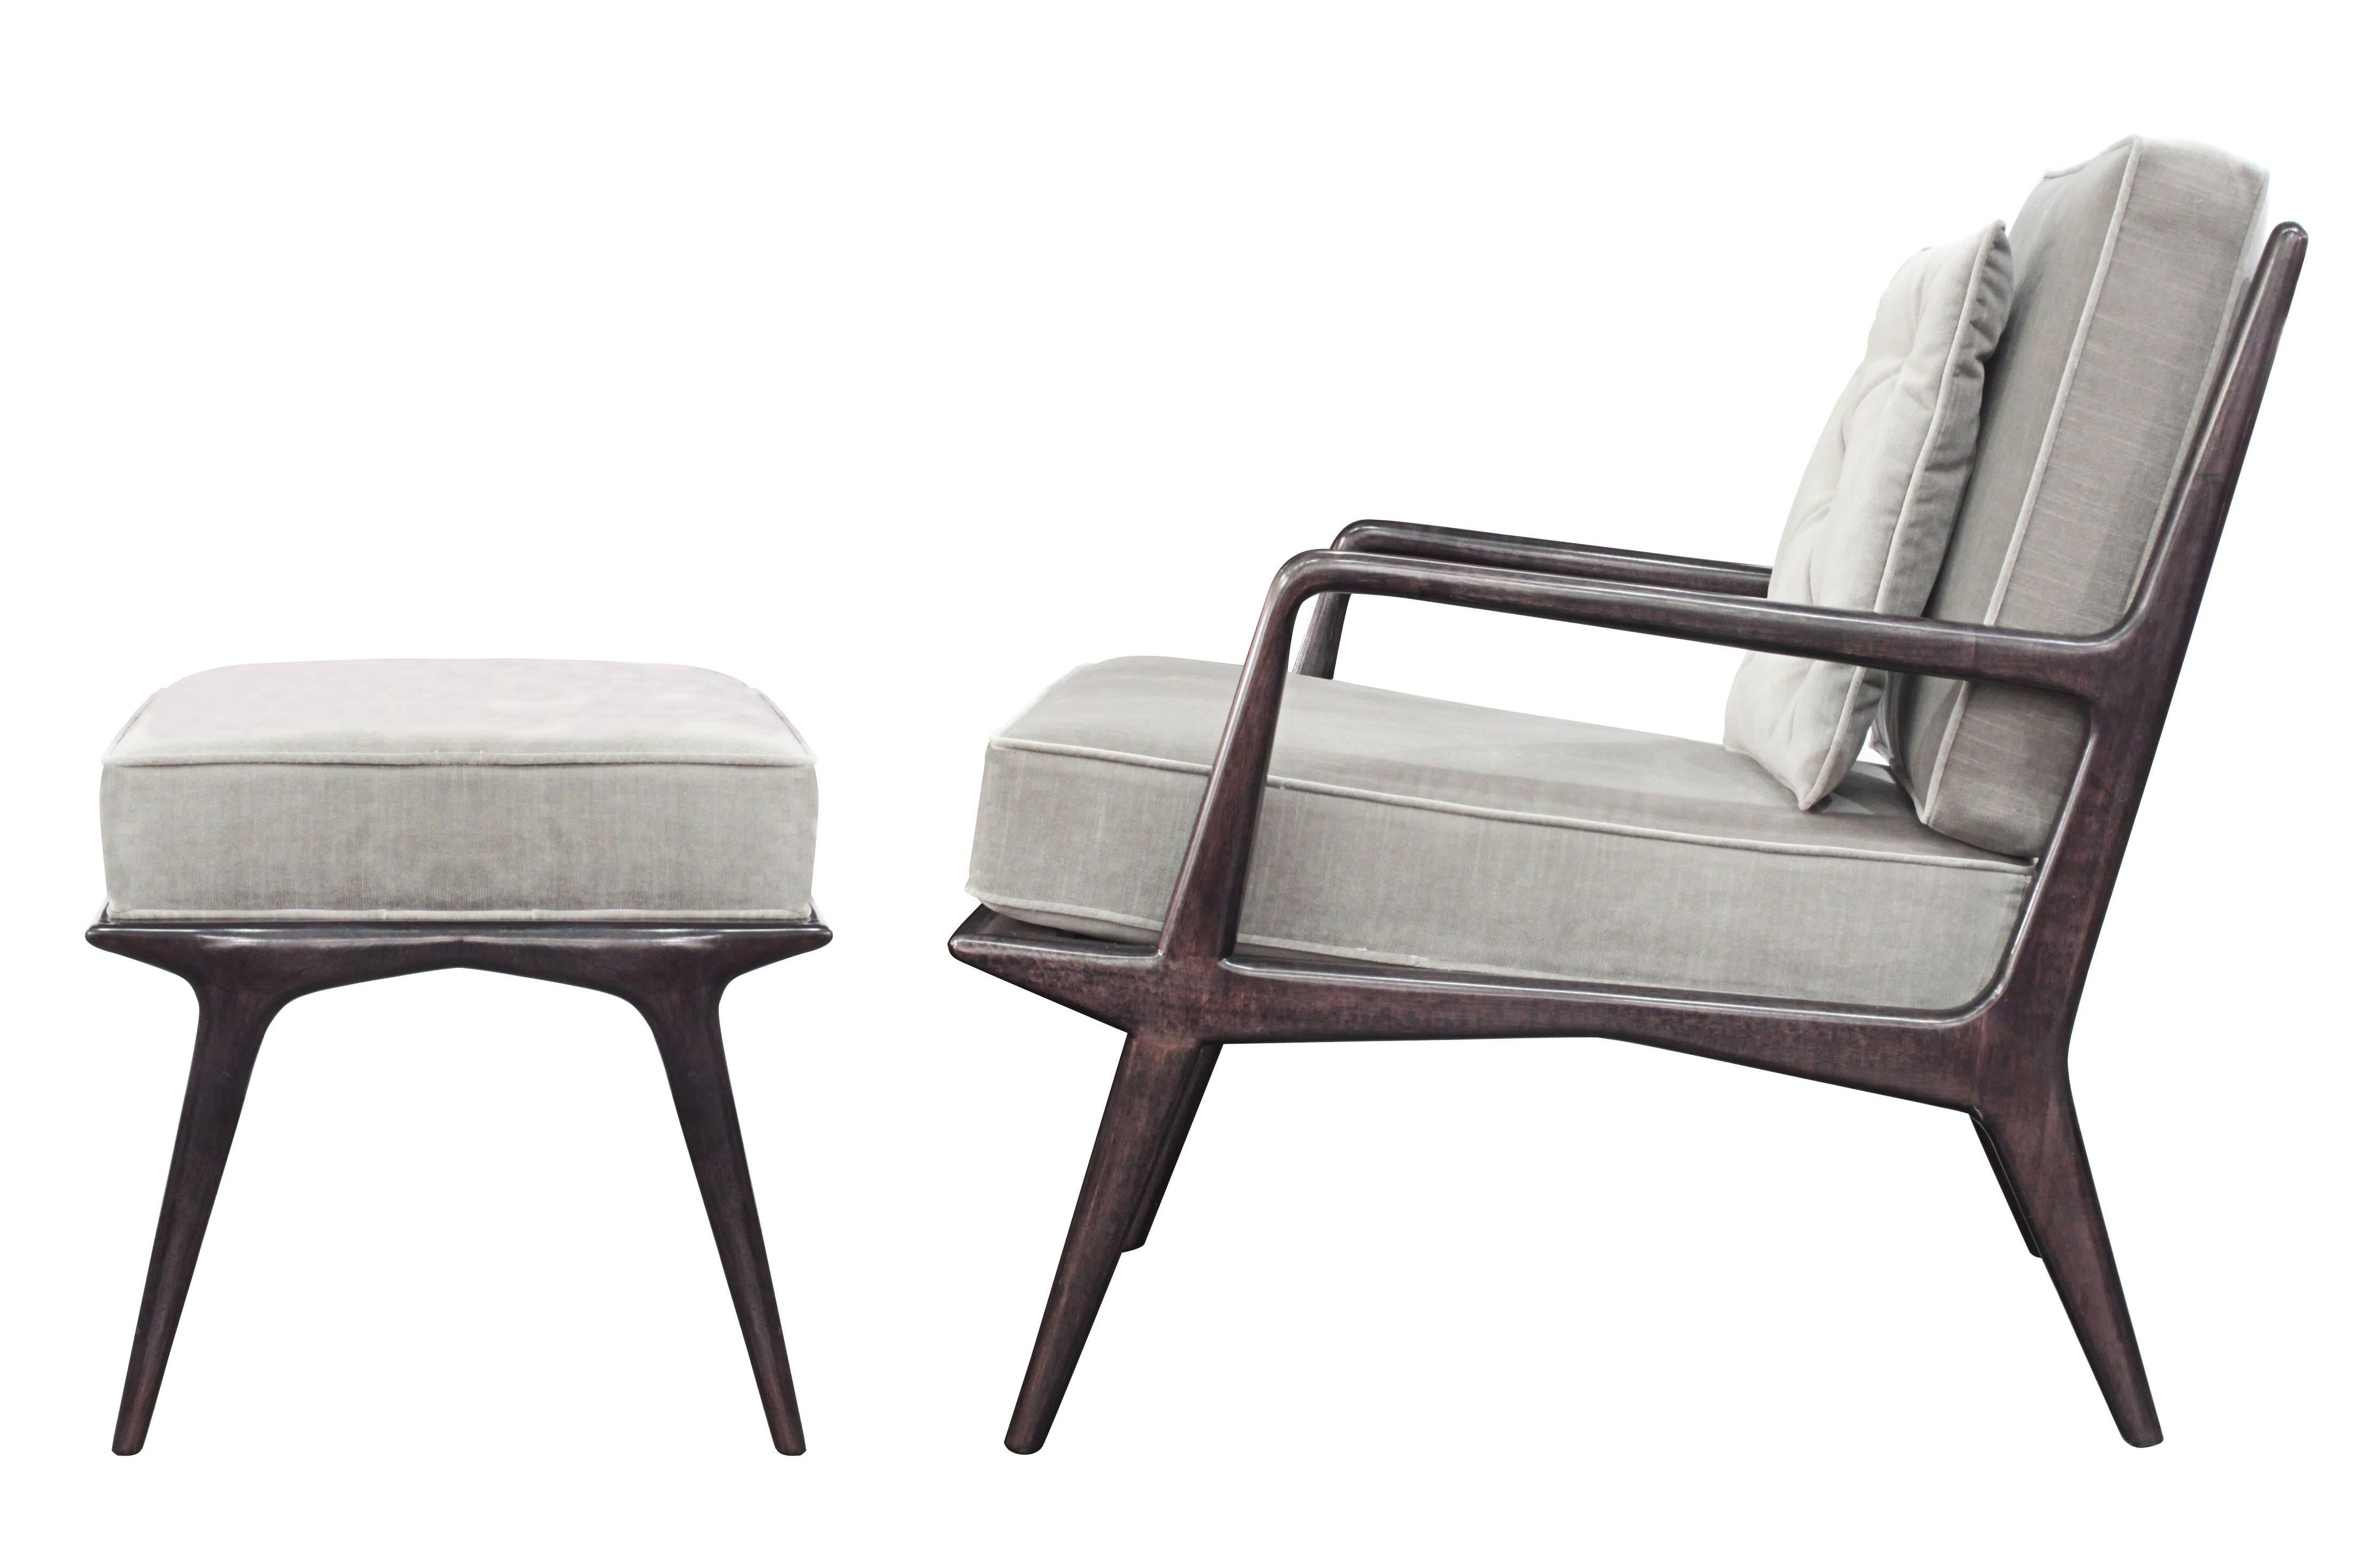 Sculptural lounge chair and ottoman with frame in dark walnut by 
Carlo de Carli for M. Singer & Sons, American 1950s. 
Newly refinished and reupholstered in gray velvet by Lobel Modern. 

The ottoman is 24 1/2 inches wide x 18 inches deep x 17